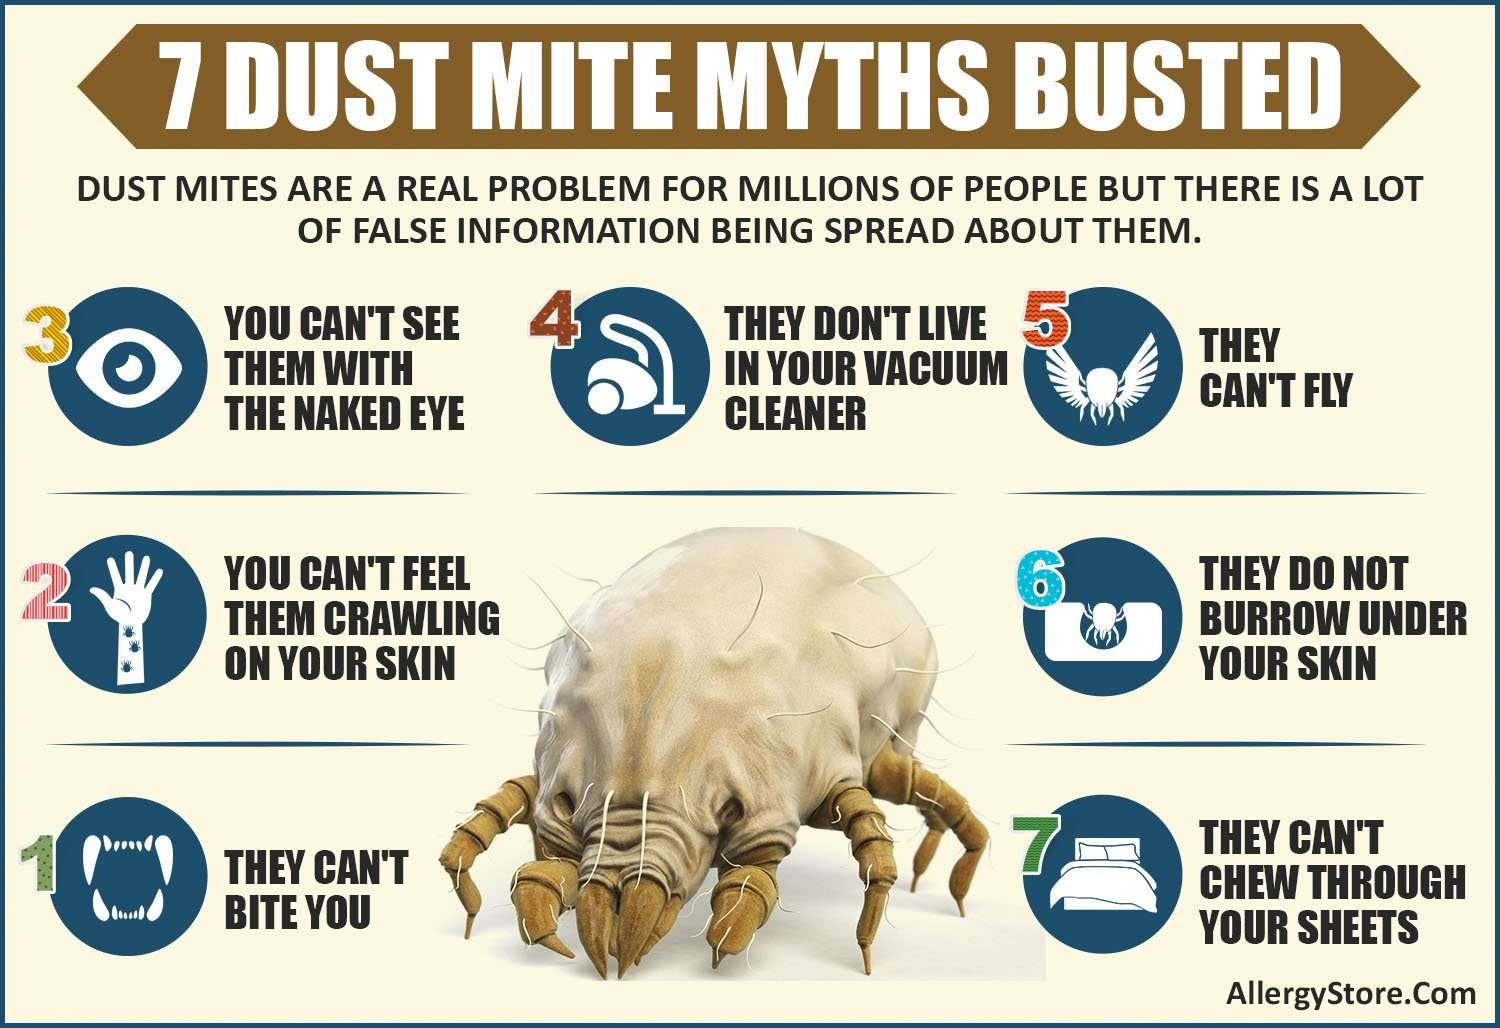 7 Dust Mite Myths Busted